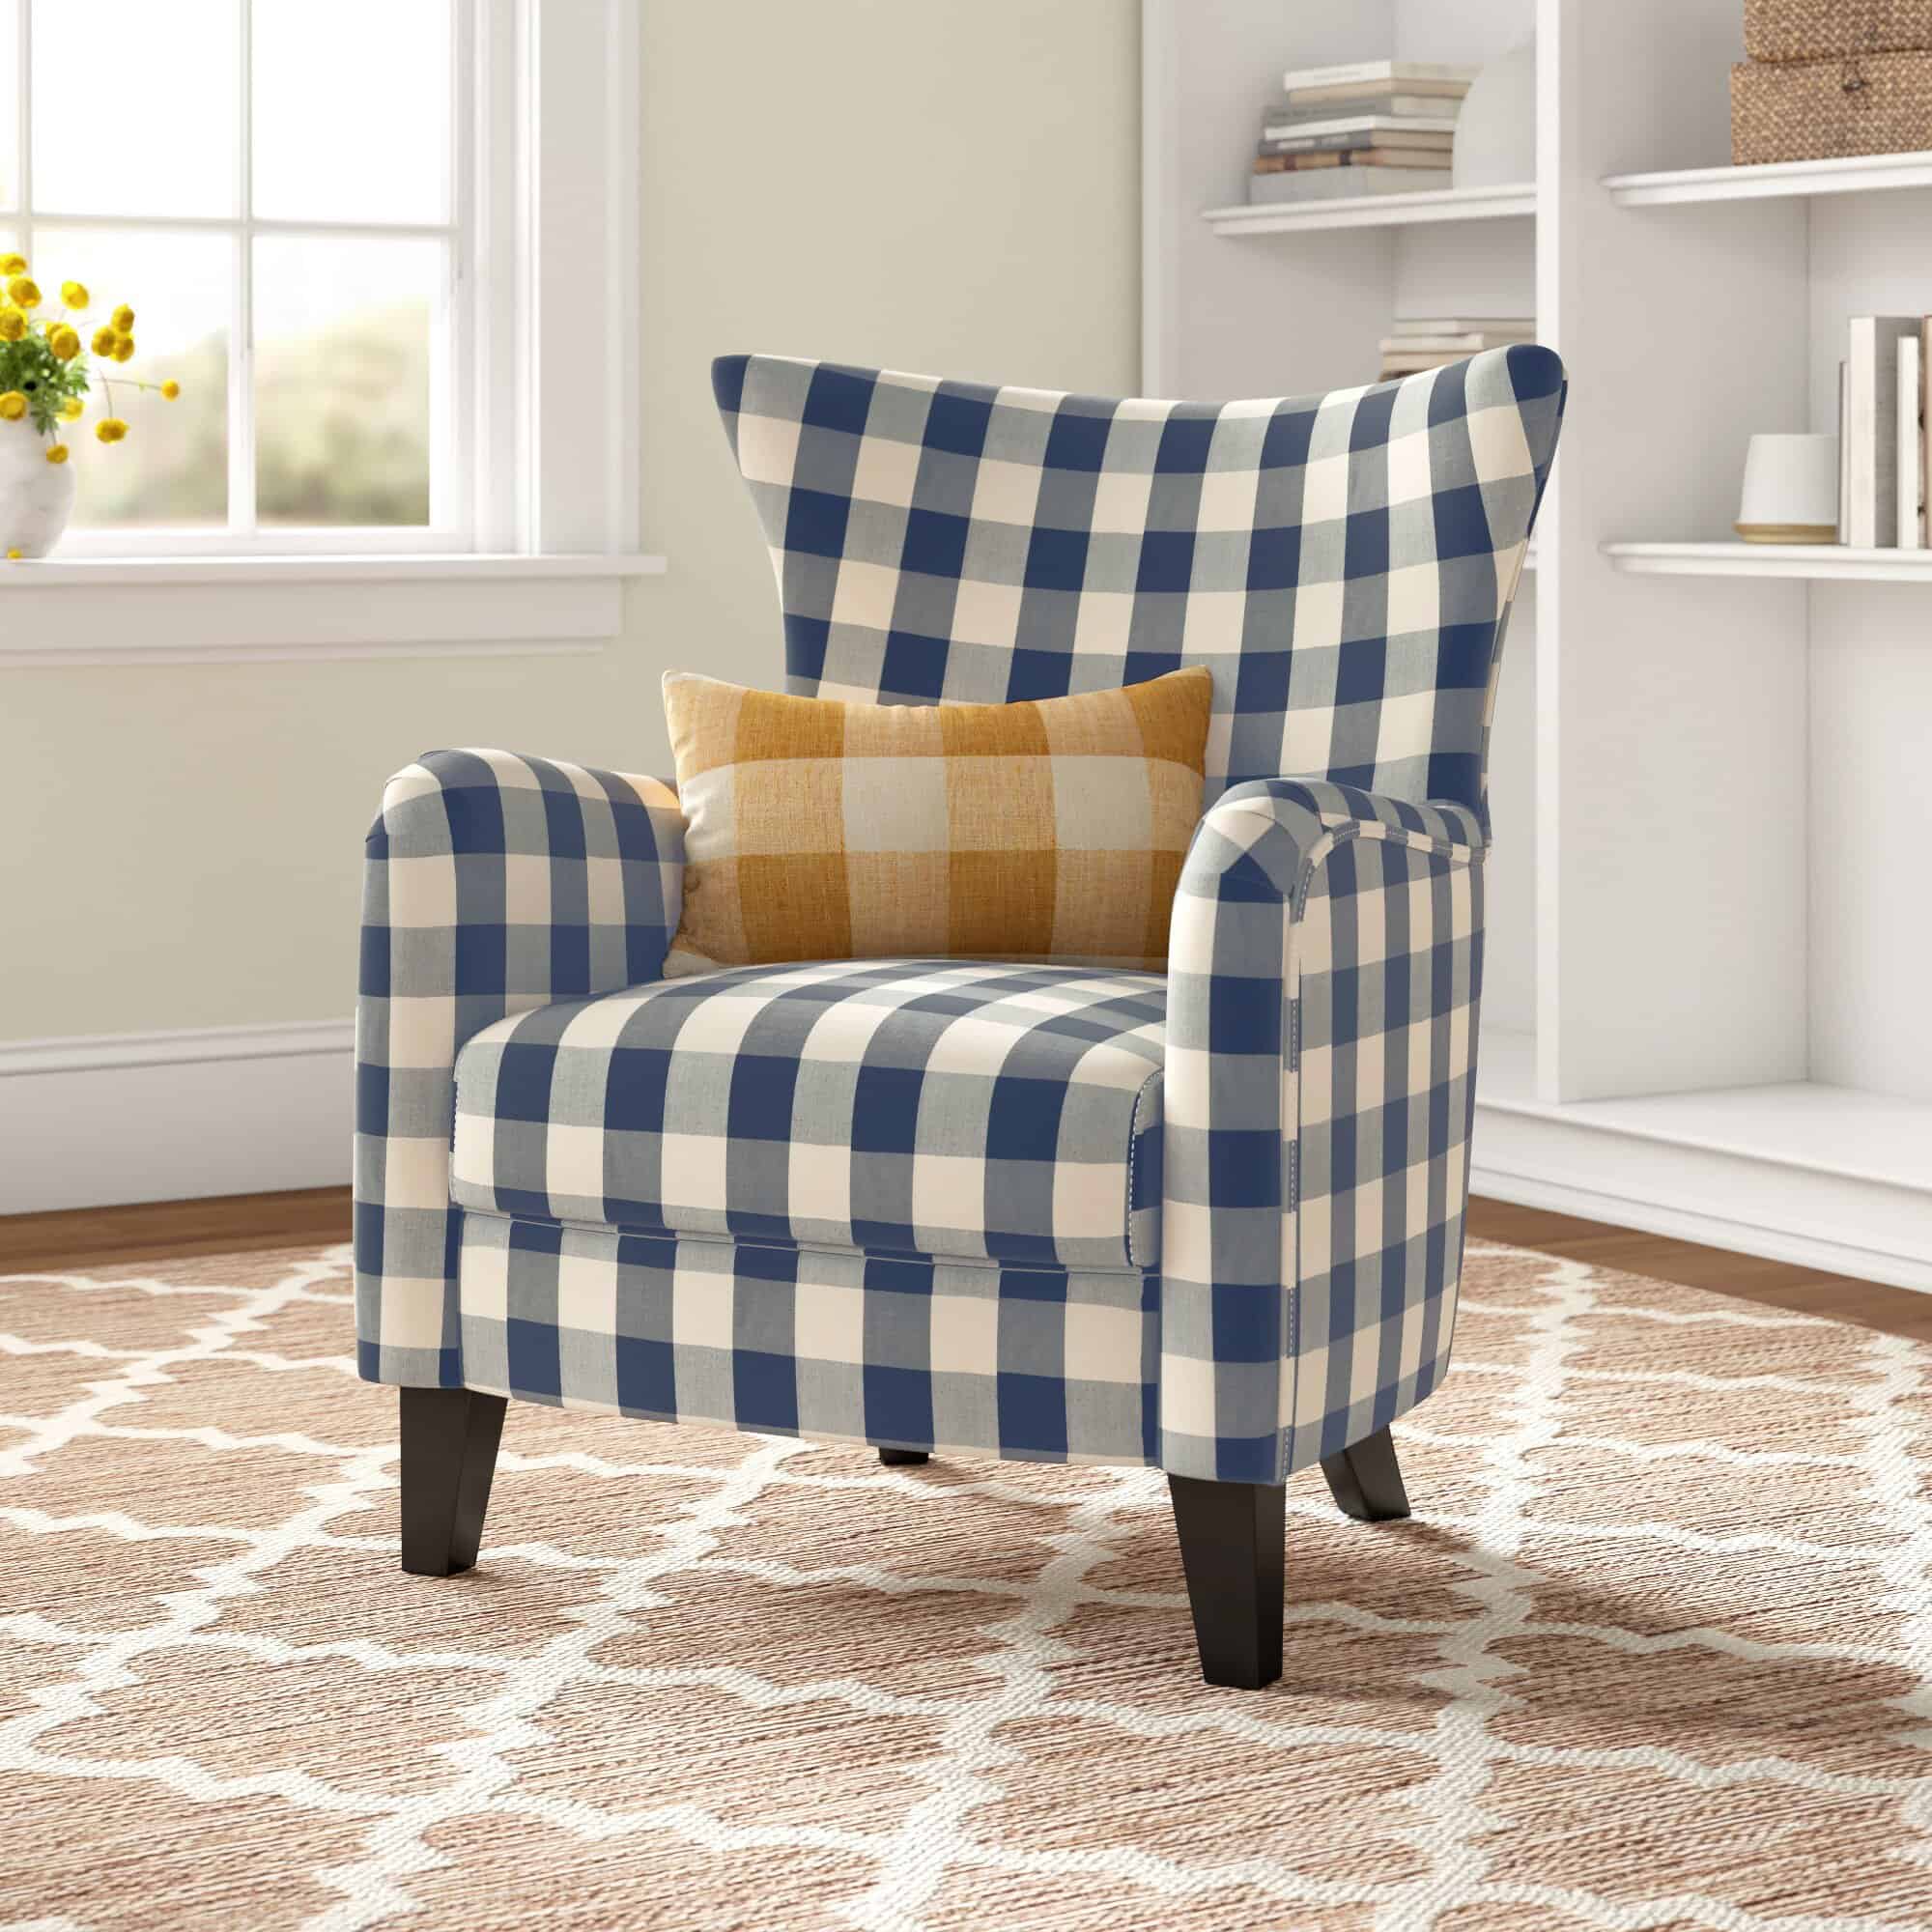 A Checkered White And Blue Armchair Feels Like Home